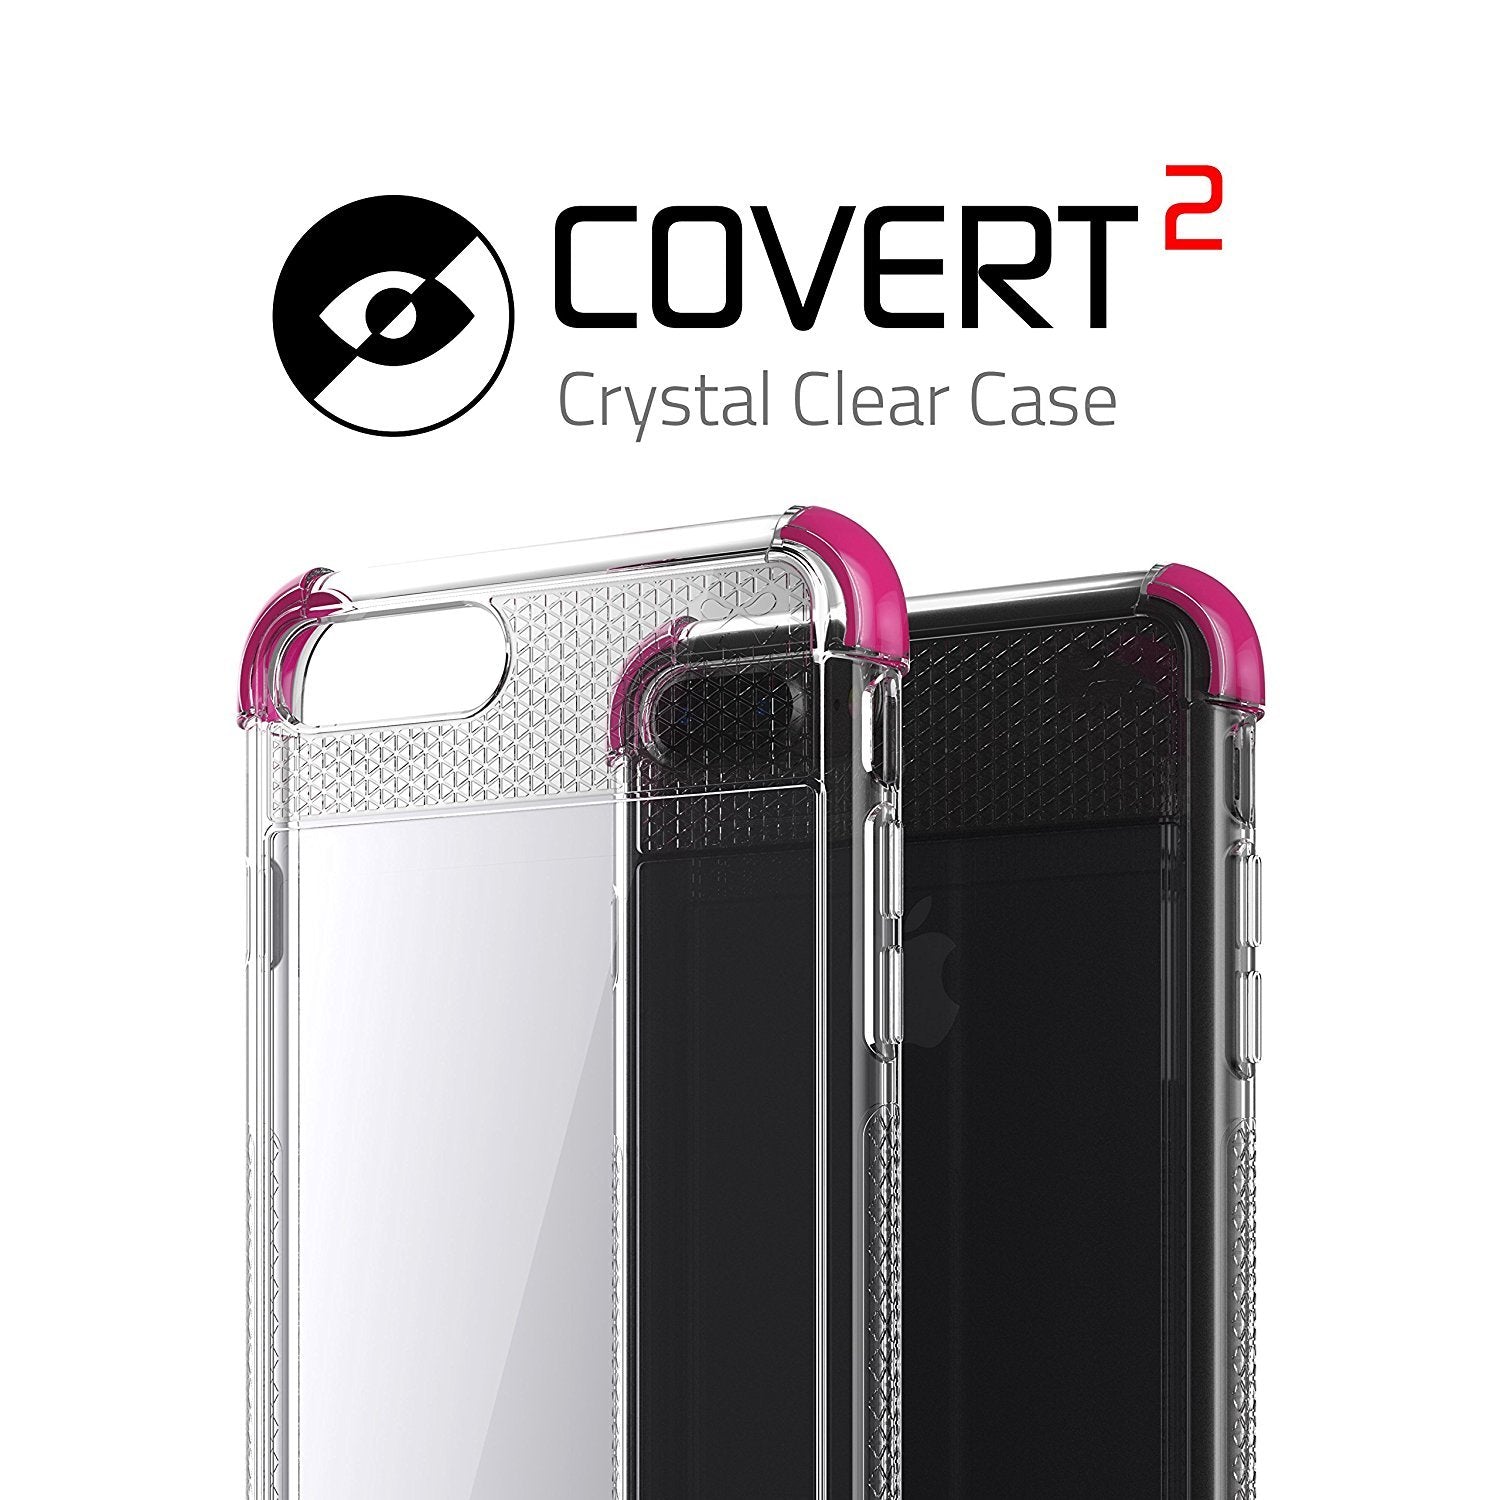 iPhone 8+ Plus Case, Ghostek Covert 2 Series for iPhone 8+ Plus Protective Case [ Pink]